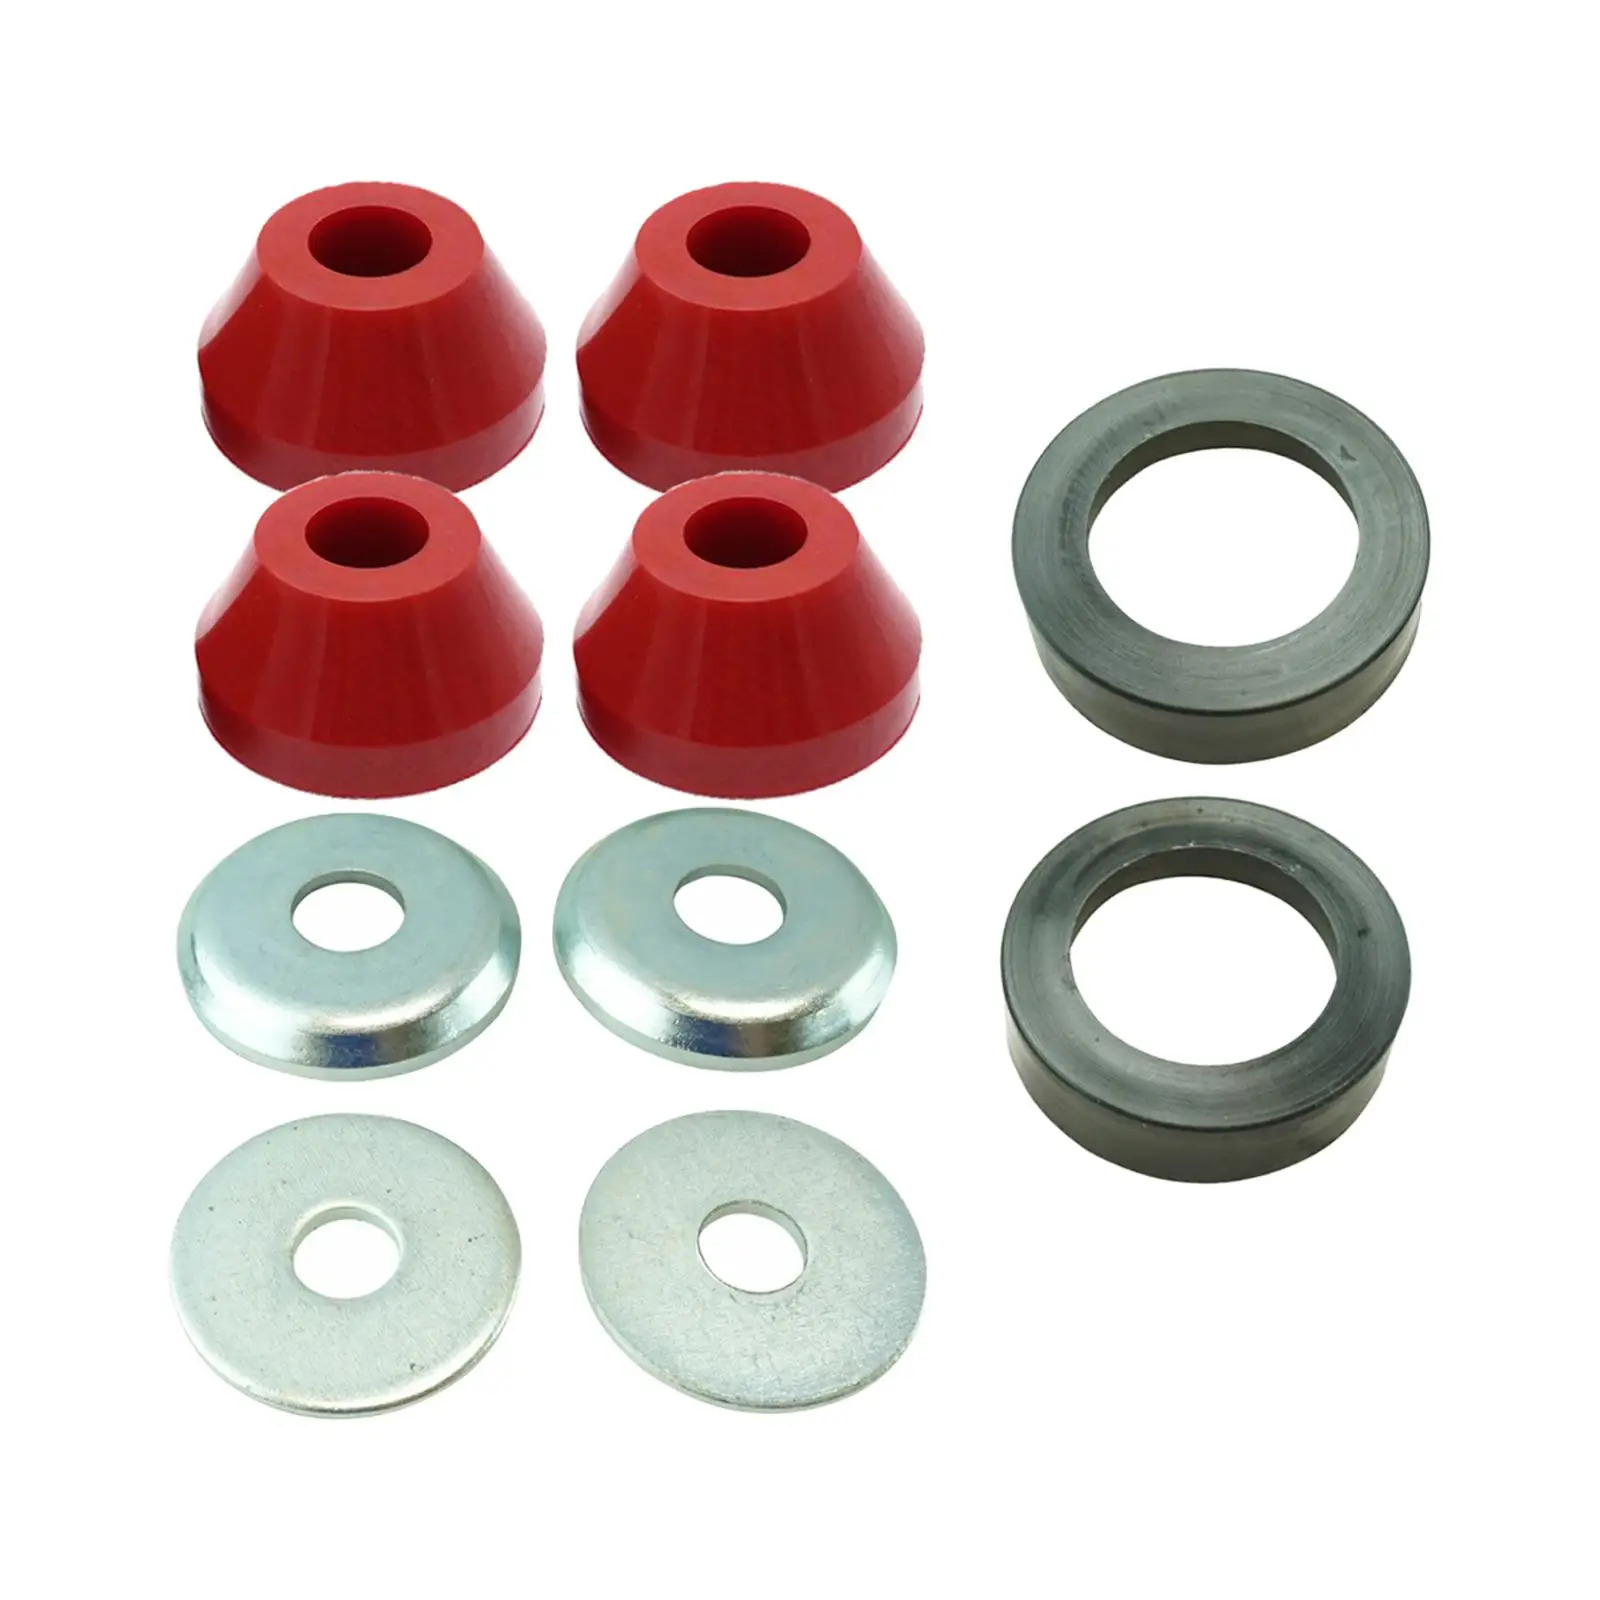 Radius Arm Bushing Replacement Parts for Ford Bronco Ranger F150 F250